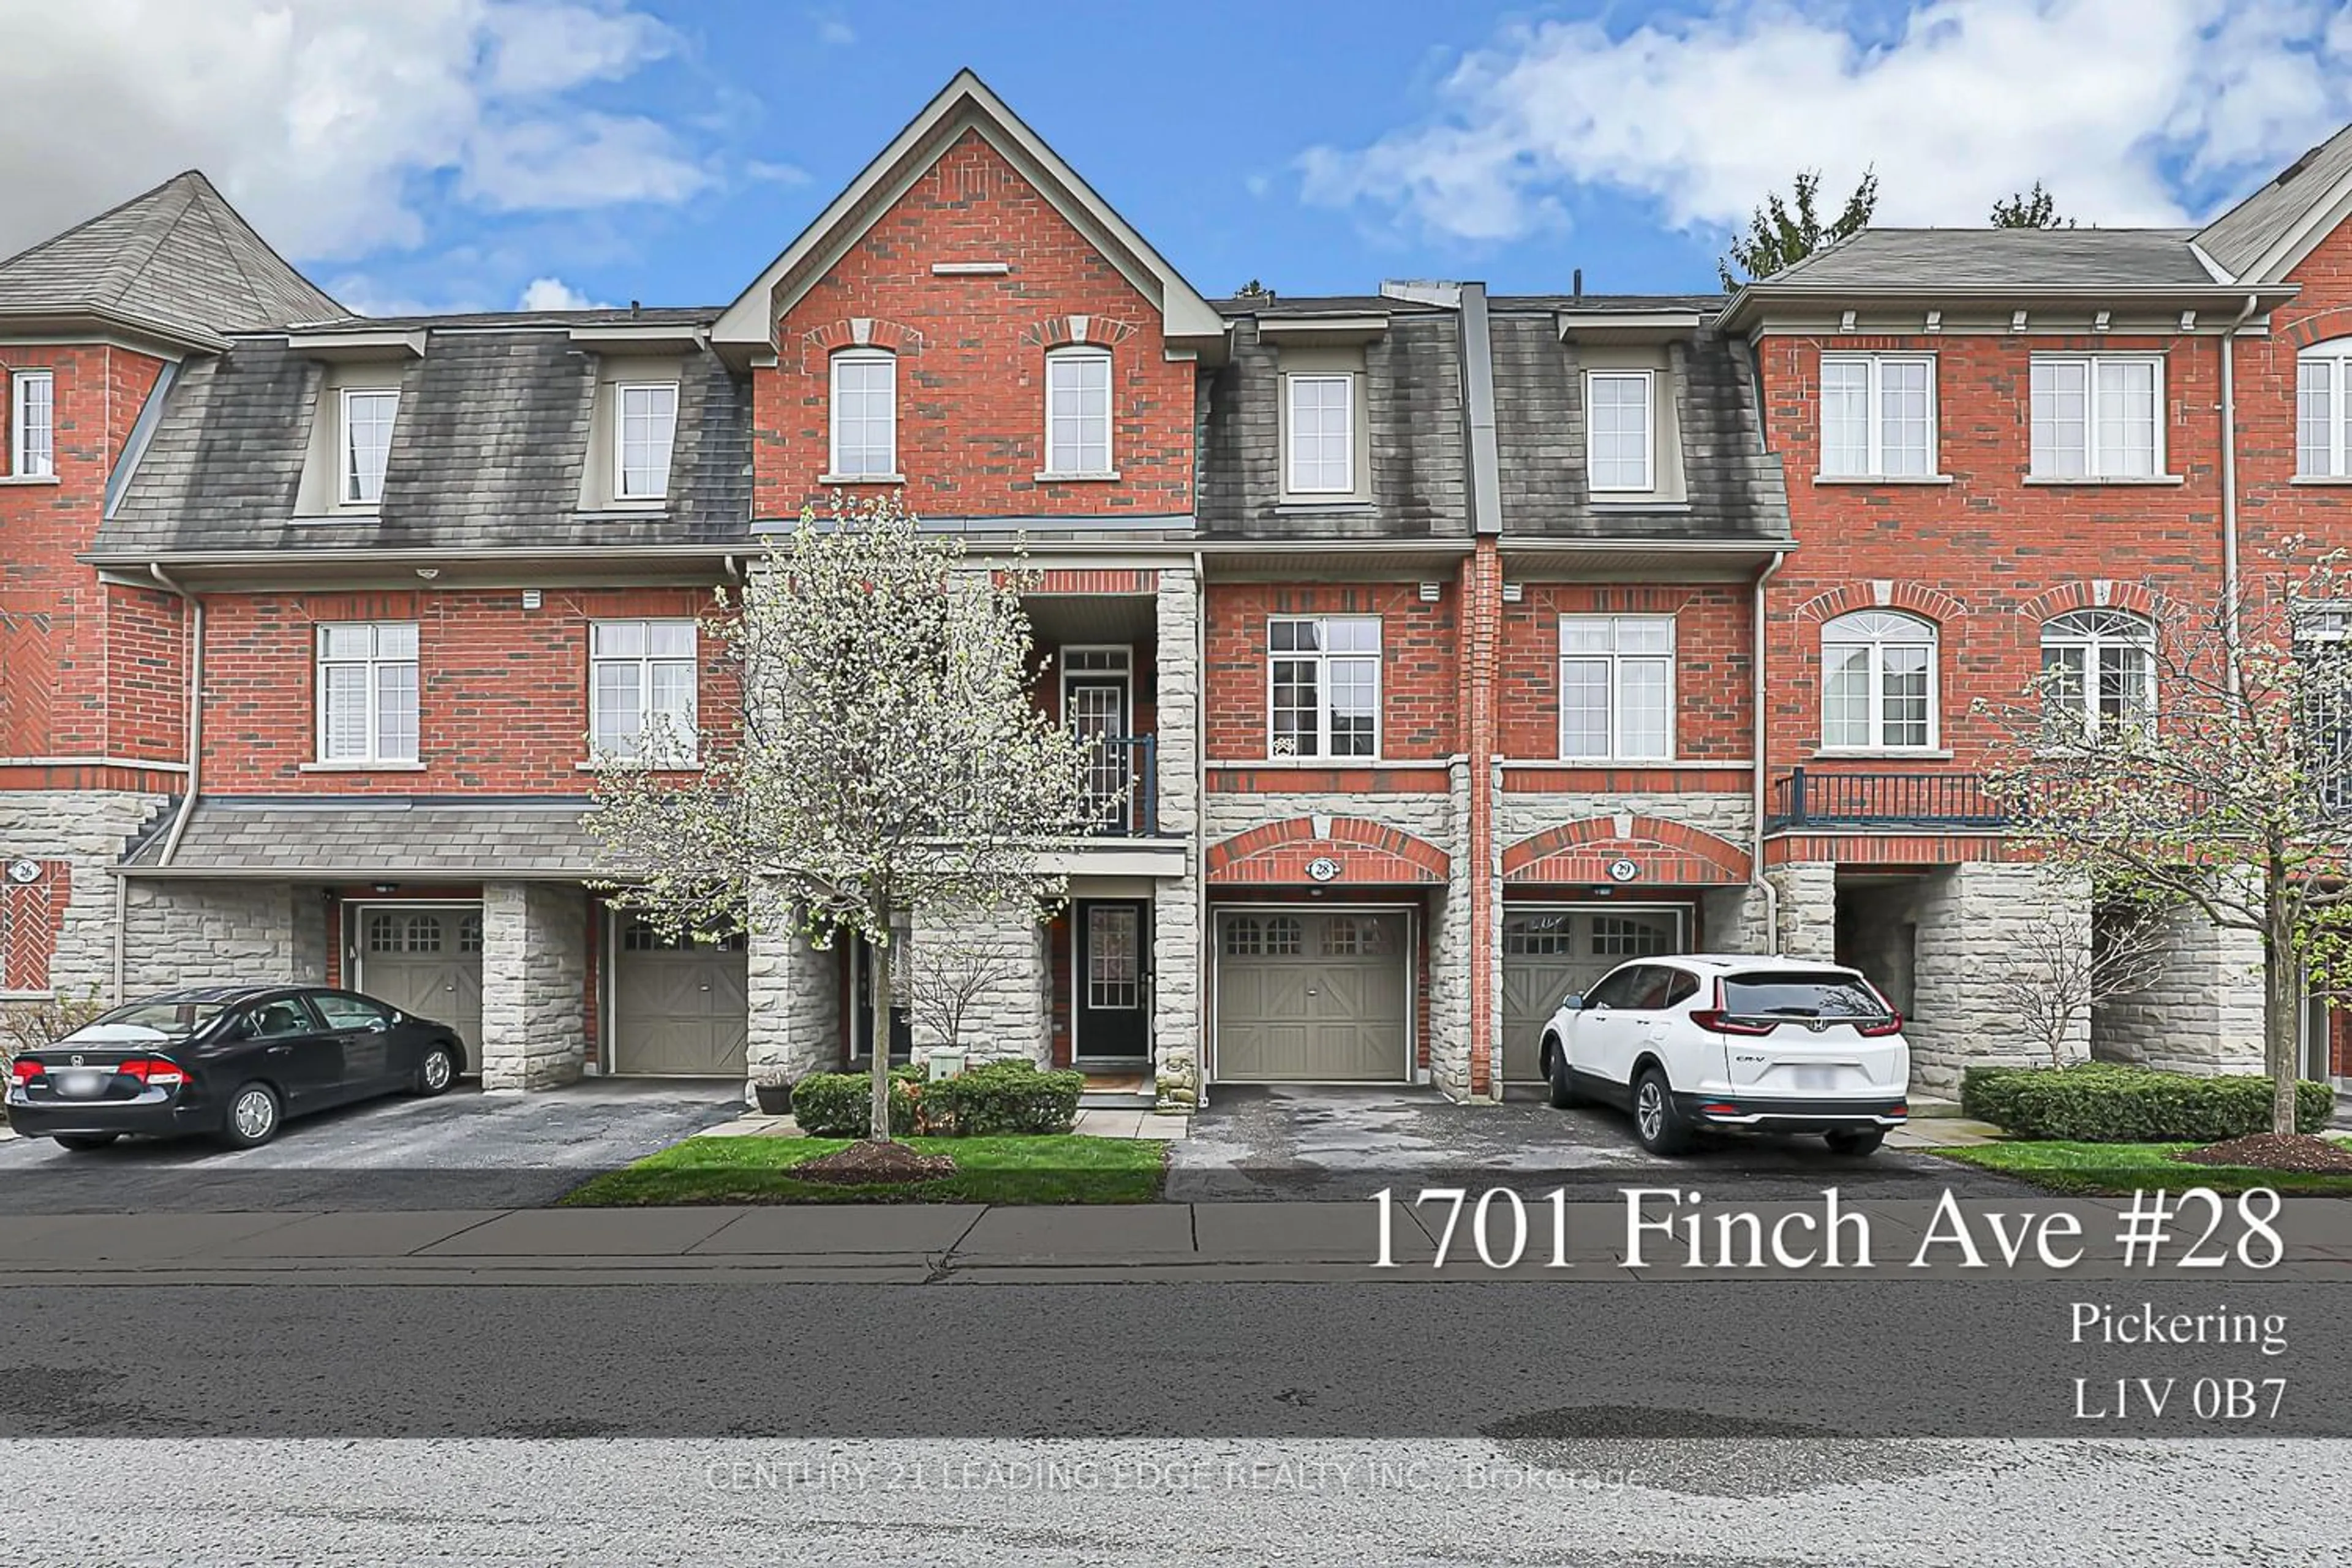 A pic from exterior of the house or condo for 1701 Finch Ave #28, Pickering Ontario L1V 0B7